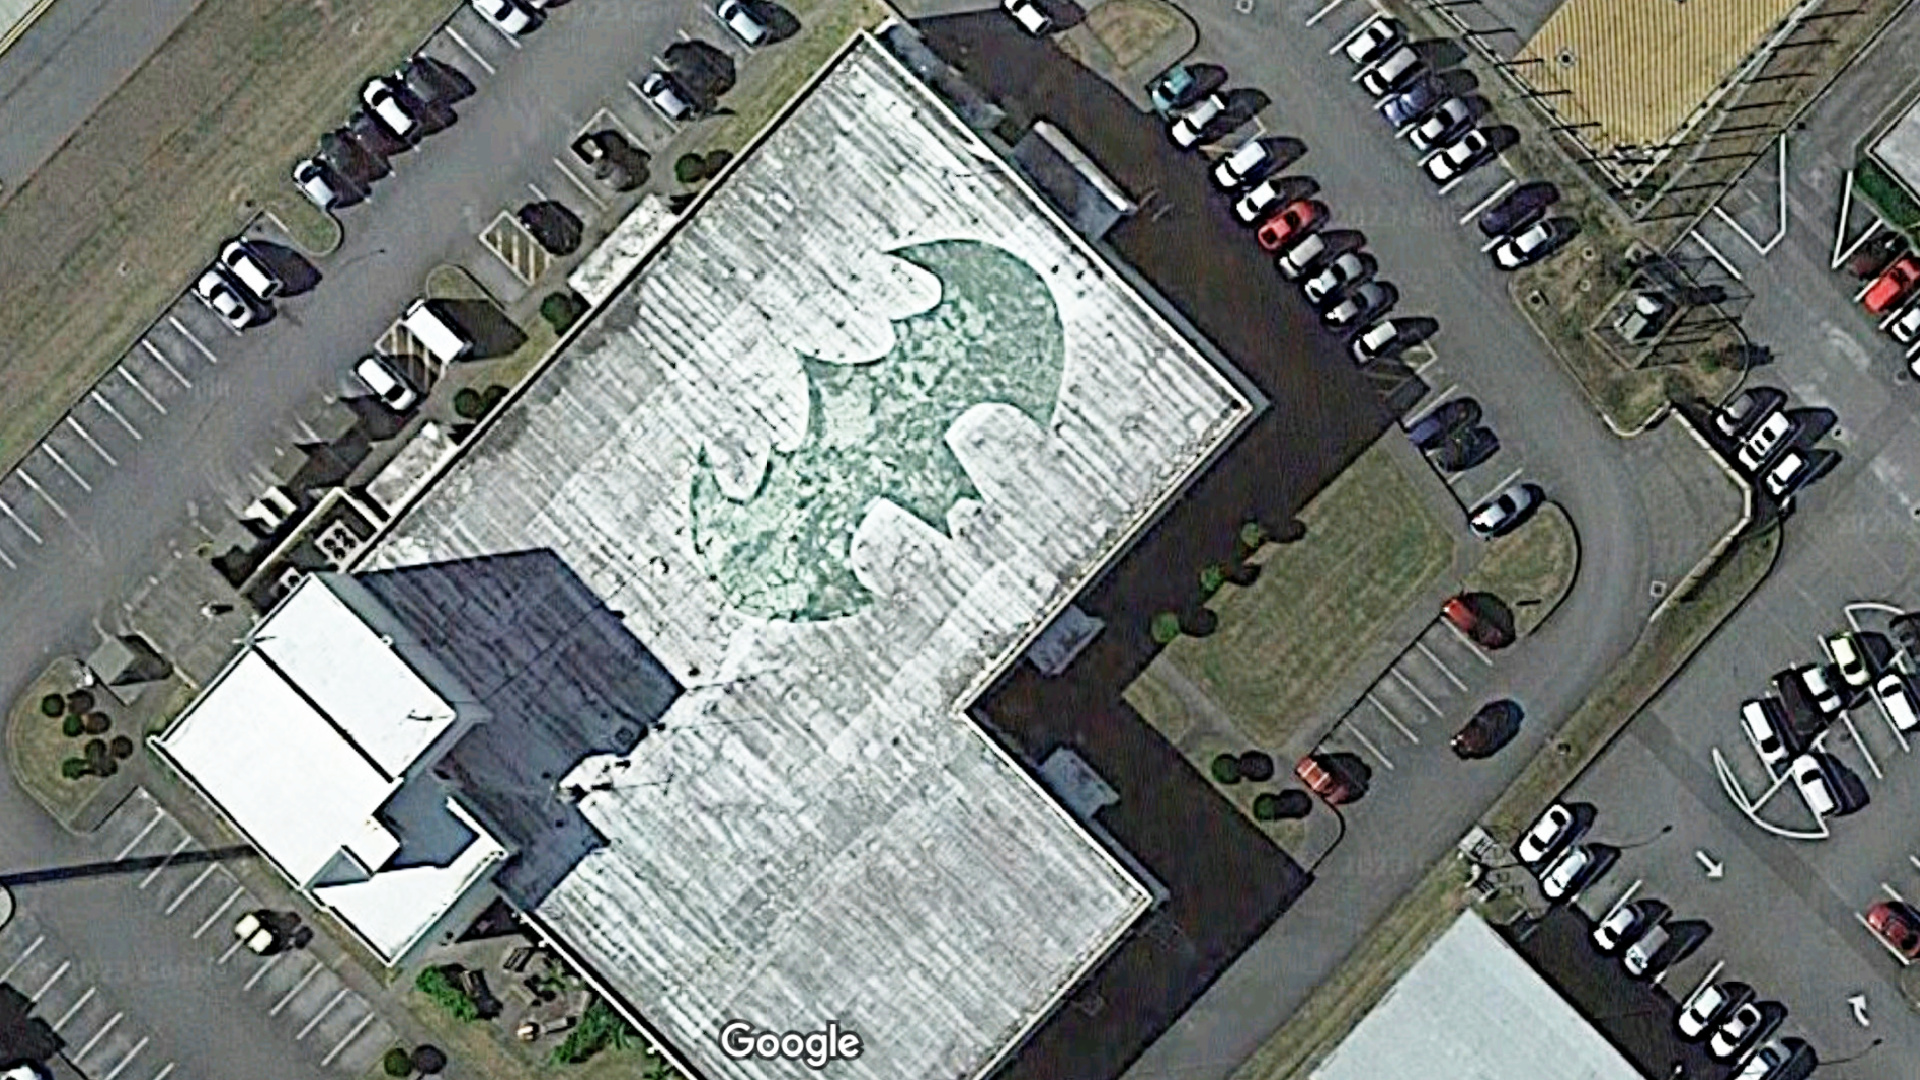 Mysterious and incredible images found by Google Earth